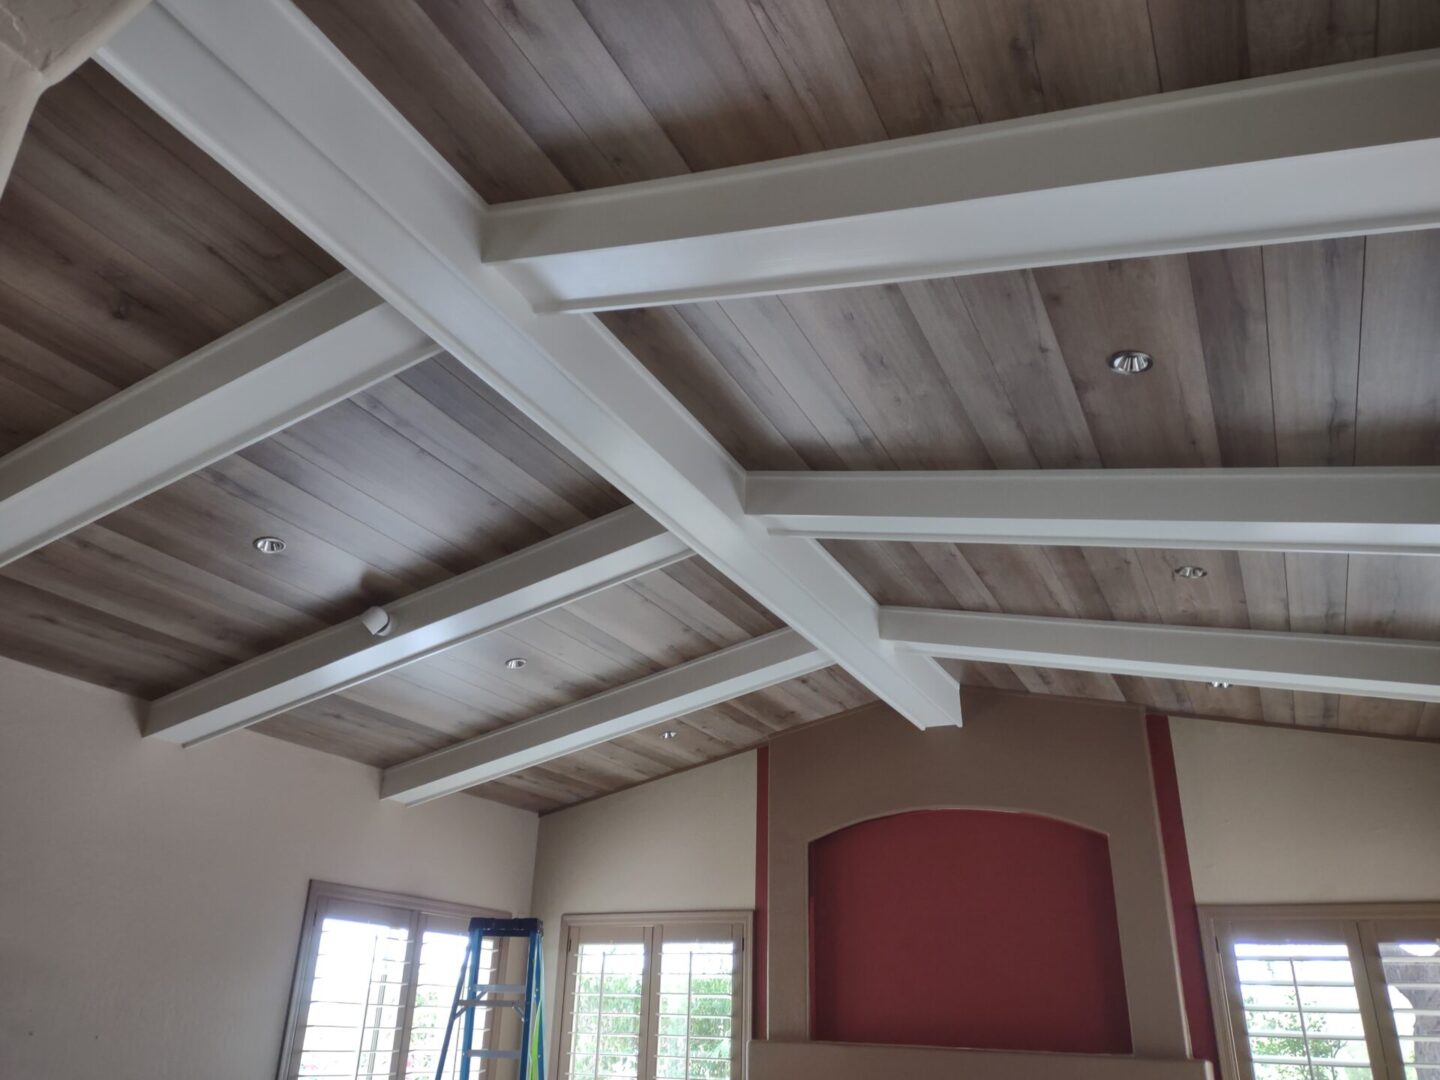 A room with wooden ceiling beams and red wall.